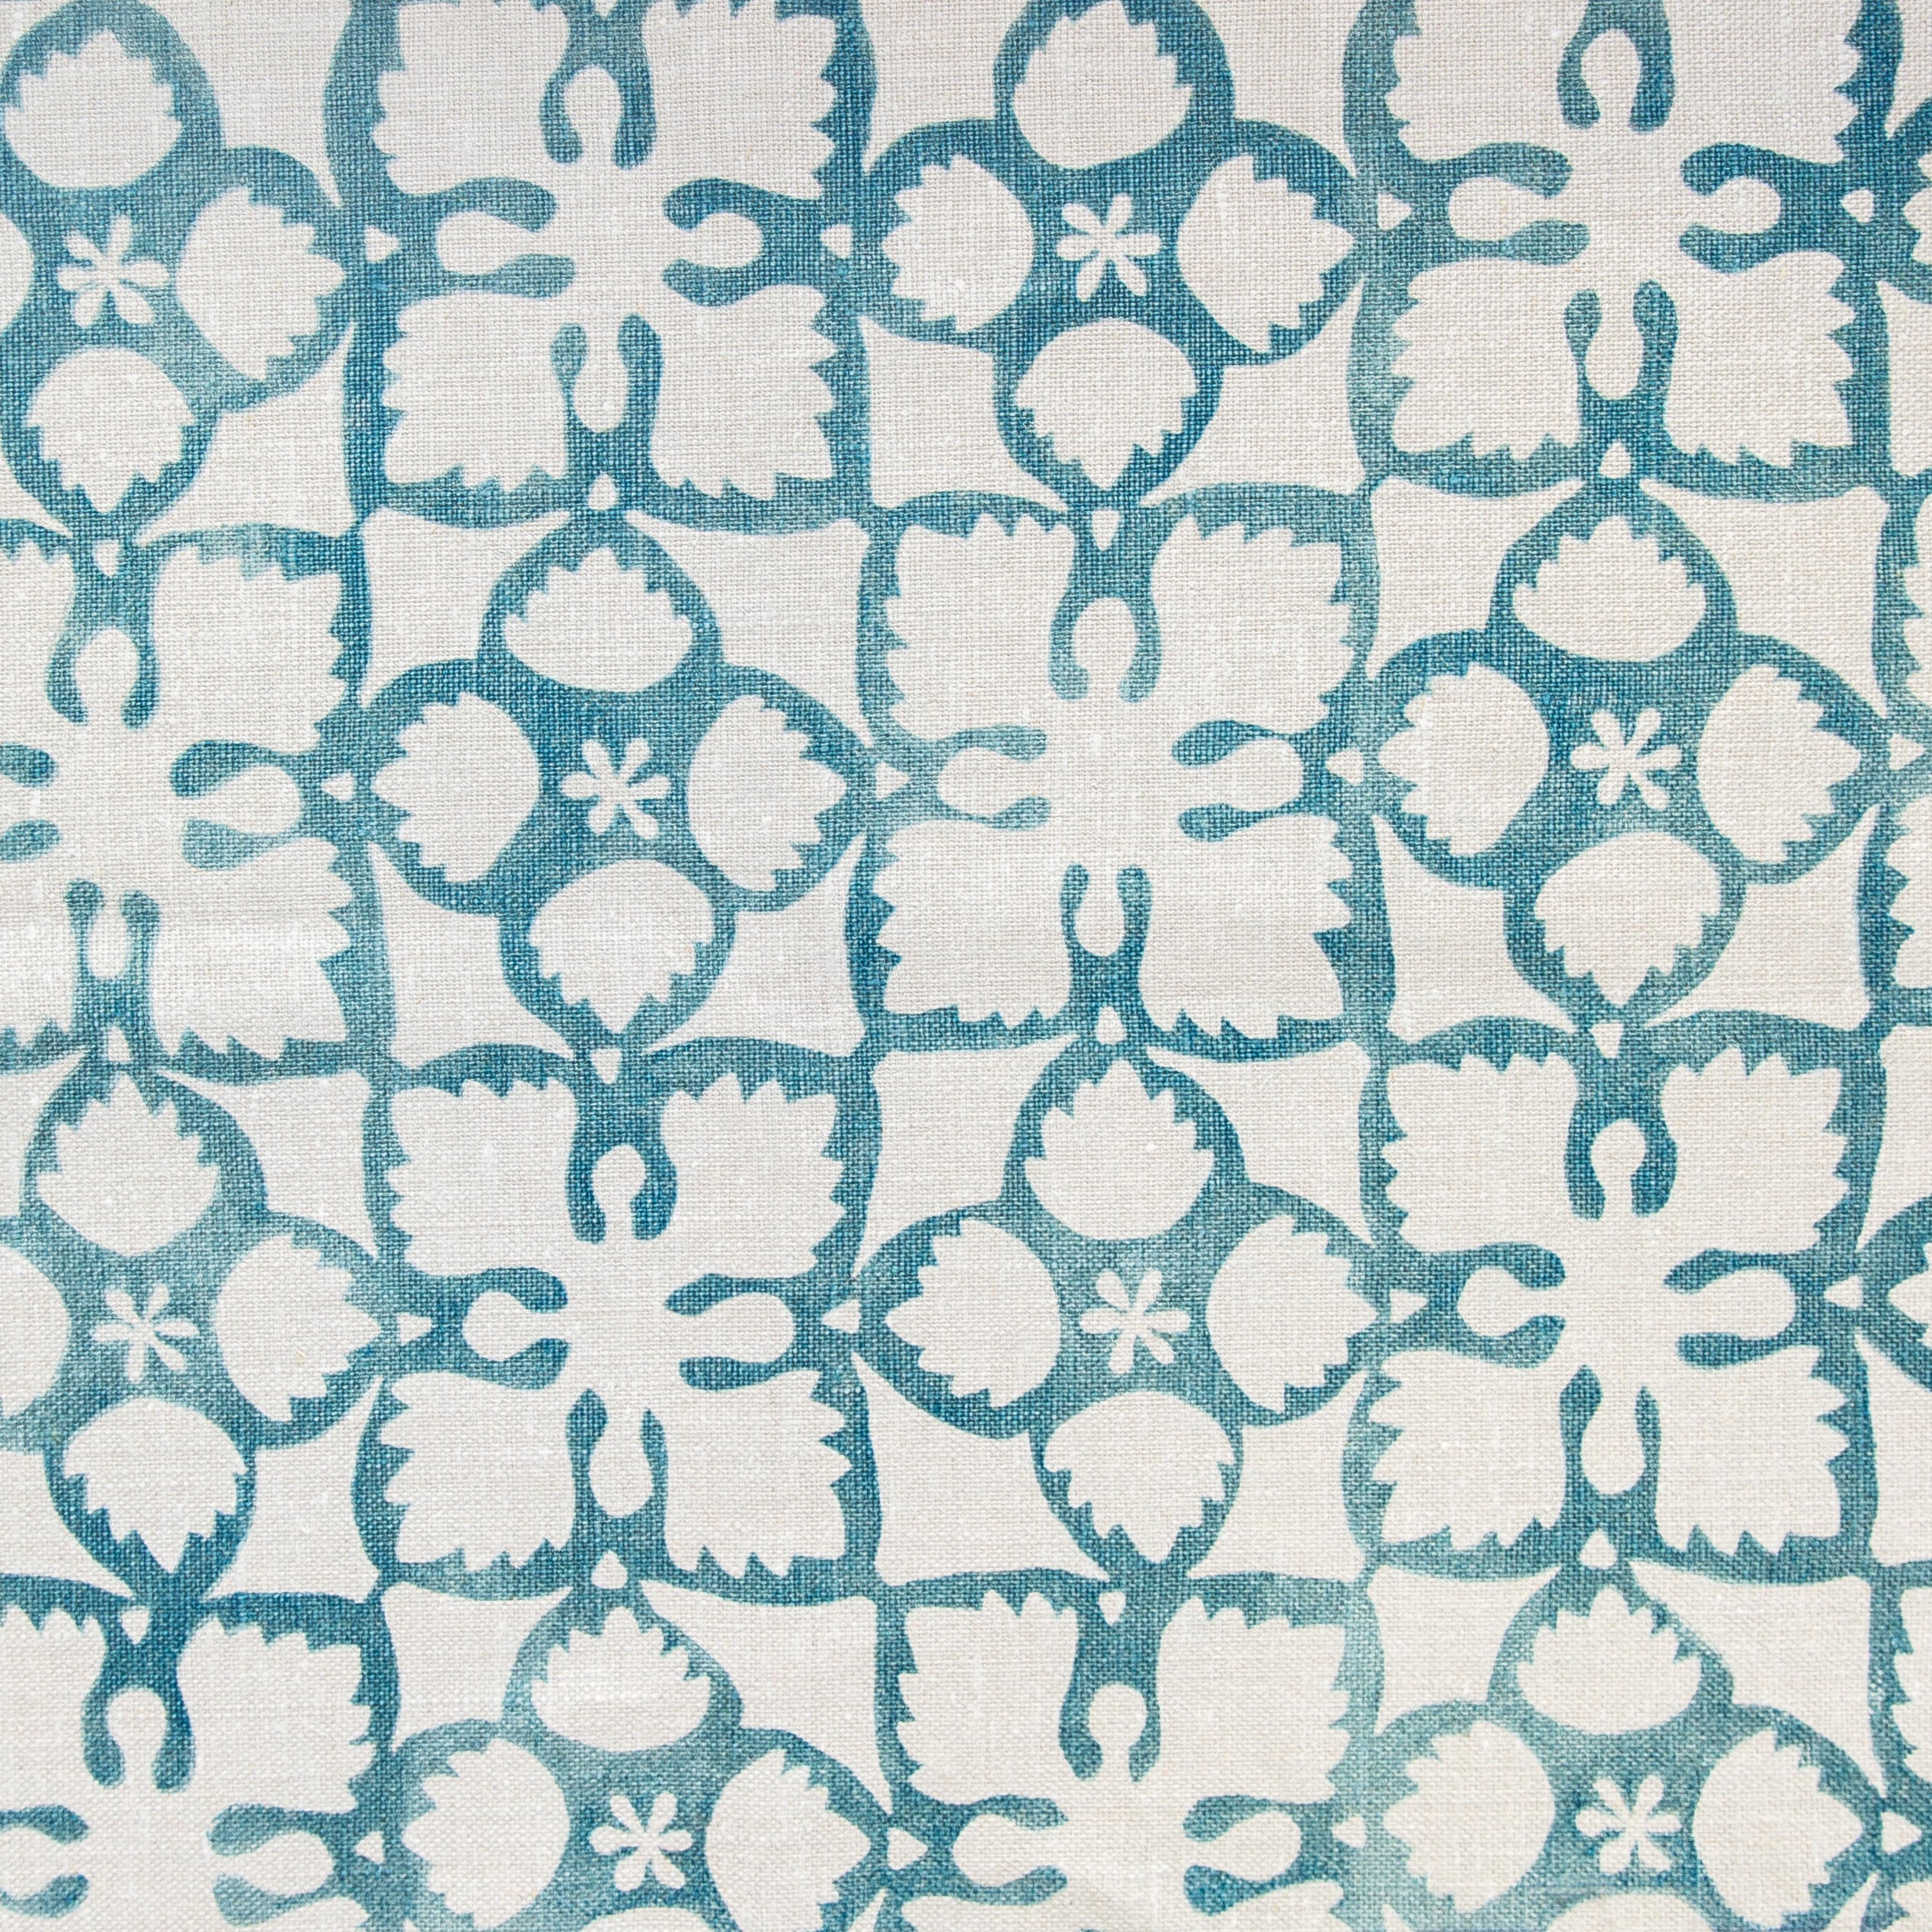 Detail of fabric in a botanical lattice print in teal on a cream field.